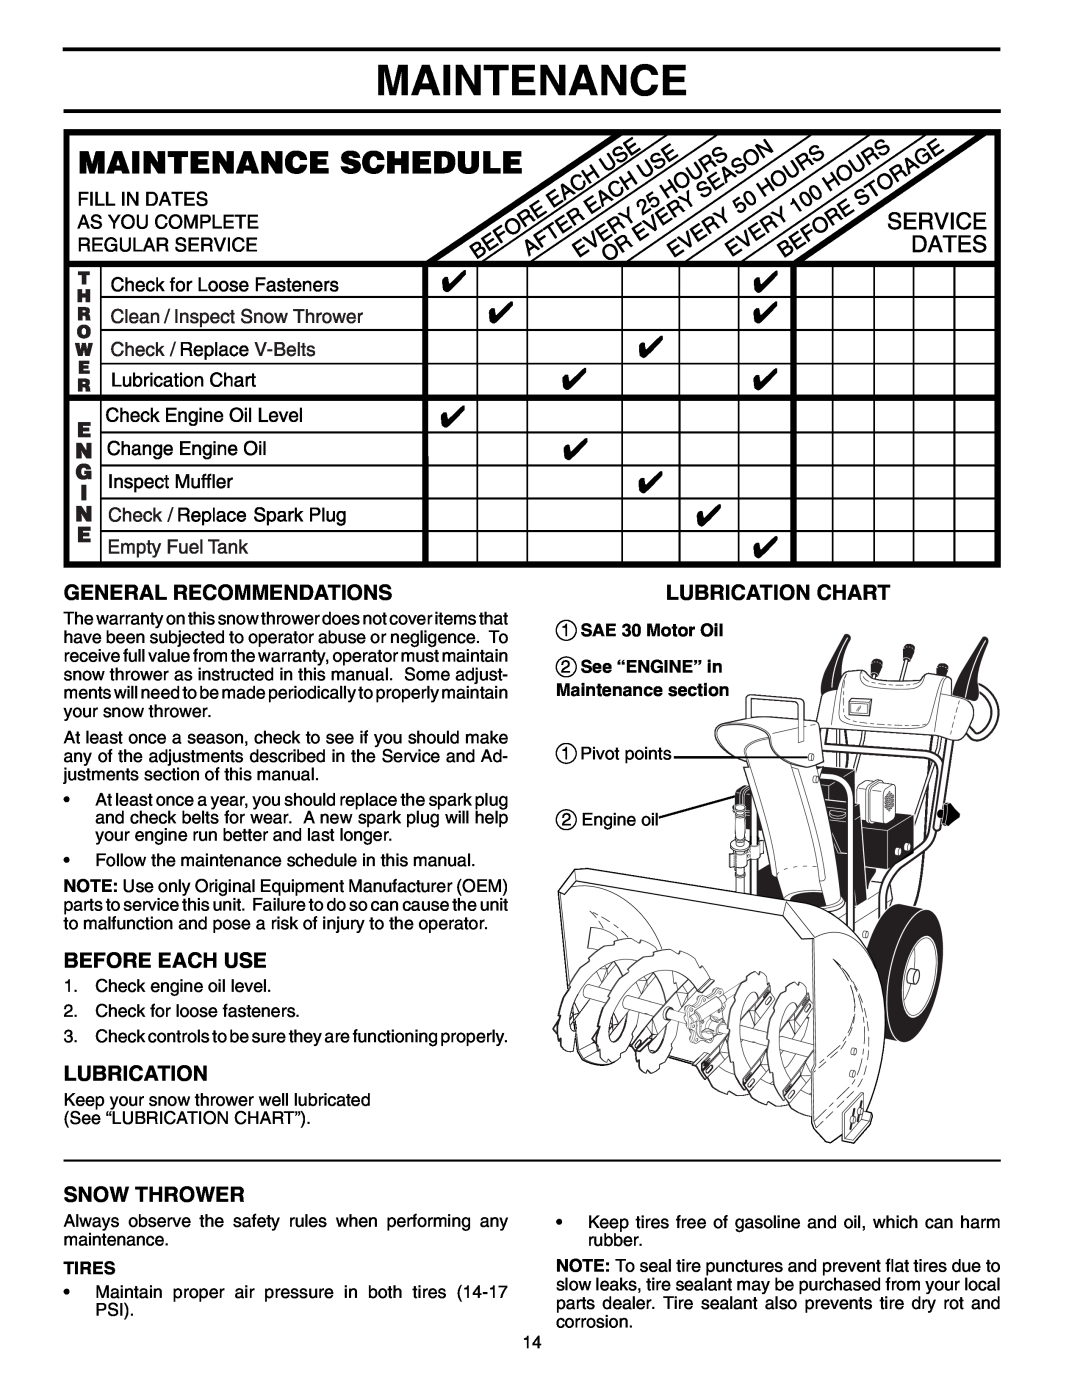 Husqvarna 8527SBEB Maintenance, General Recommendations, Before Each Use, Snow Thrower, Lubrication Chart, Tires 